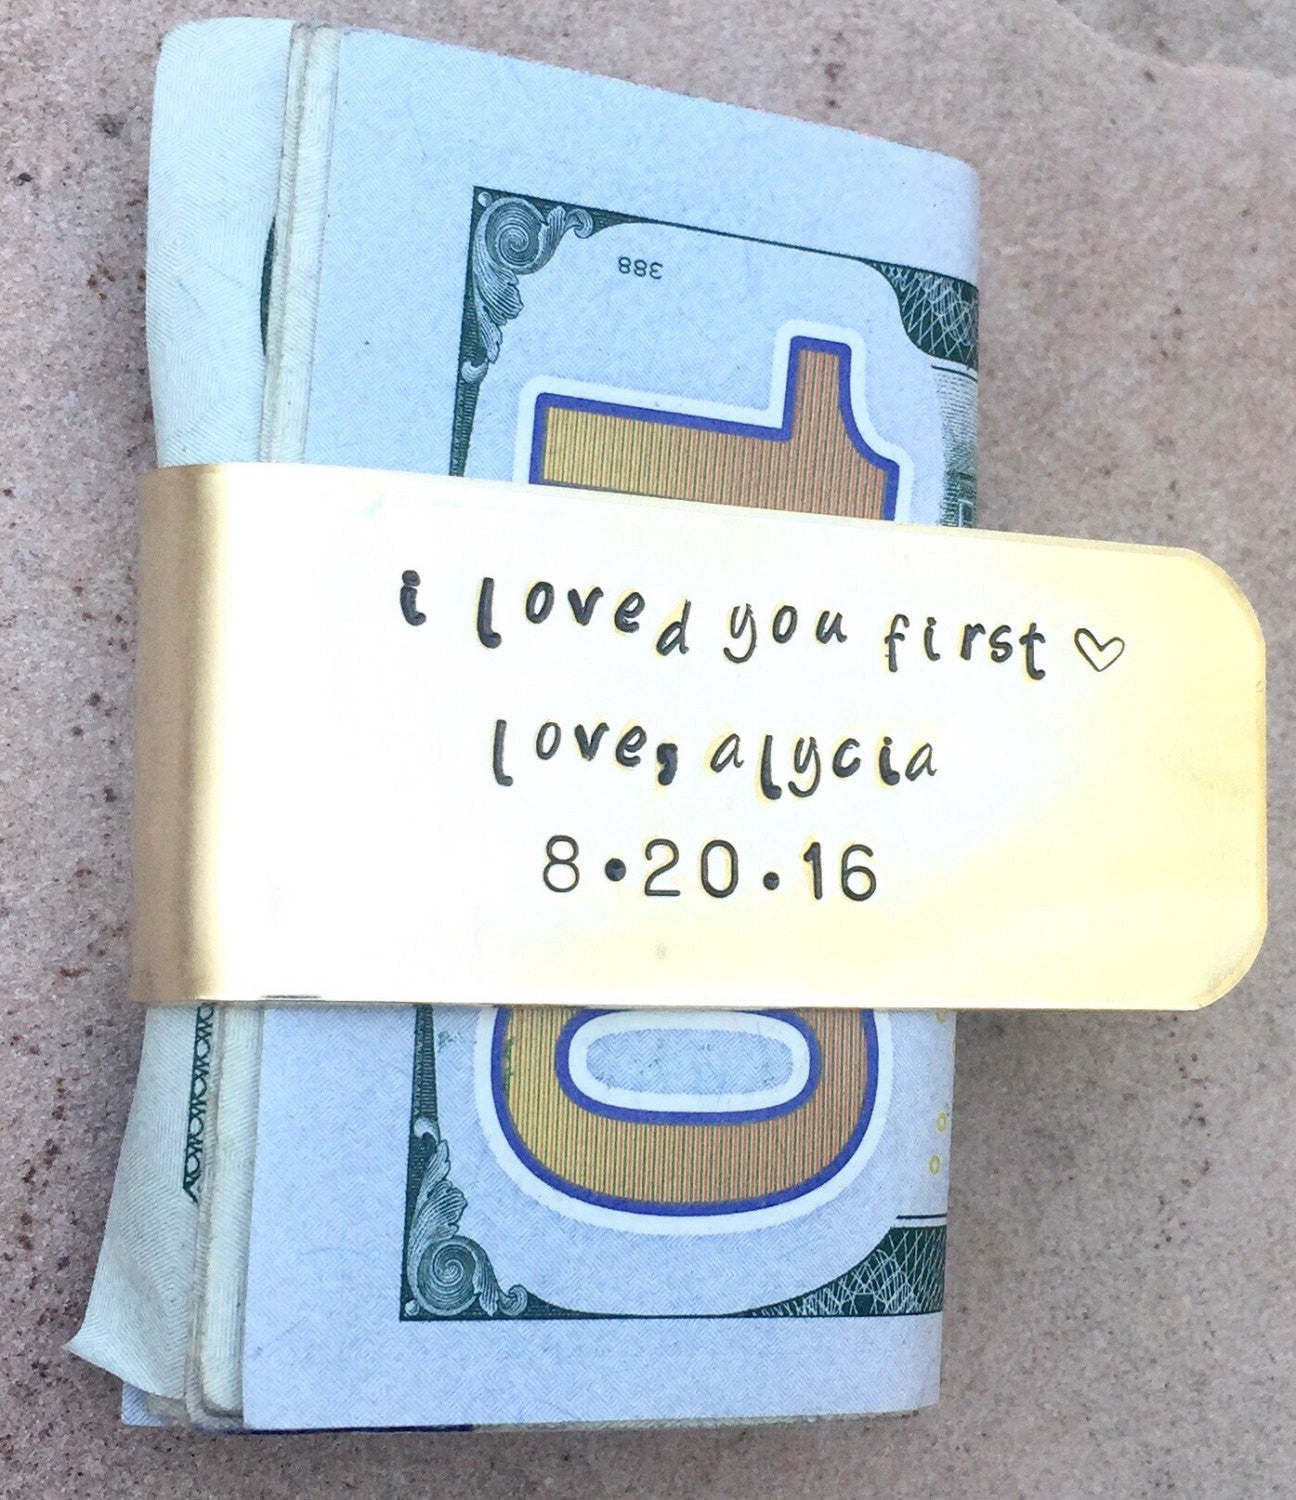 Personalized Money Clip For Dad - Natashaaloha, jewelry, bracelets, necklace, keychains, fishing lures, gifts for men, charms, personalized, 